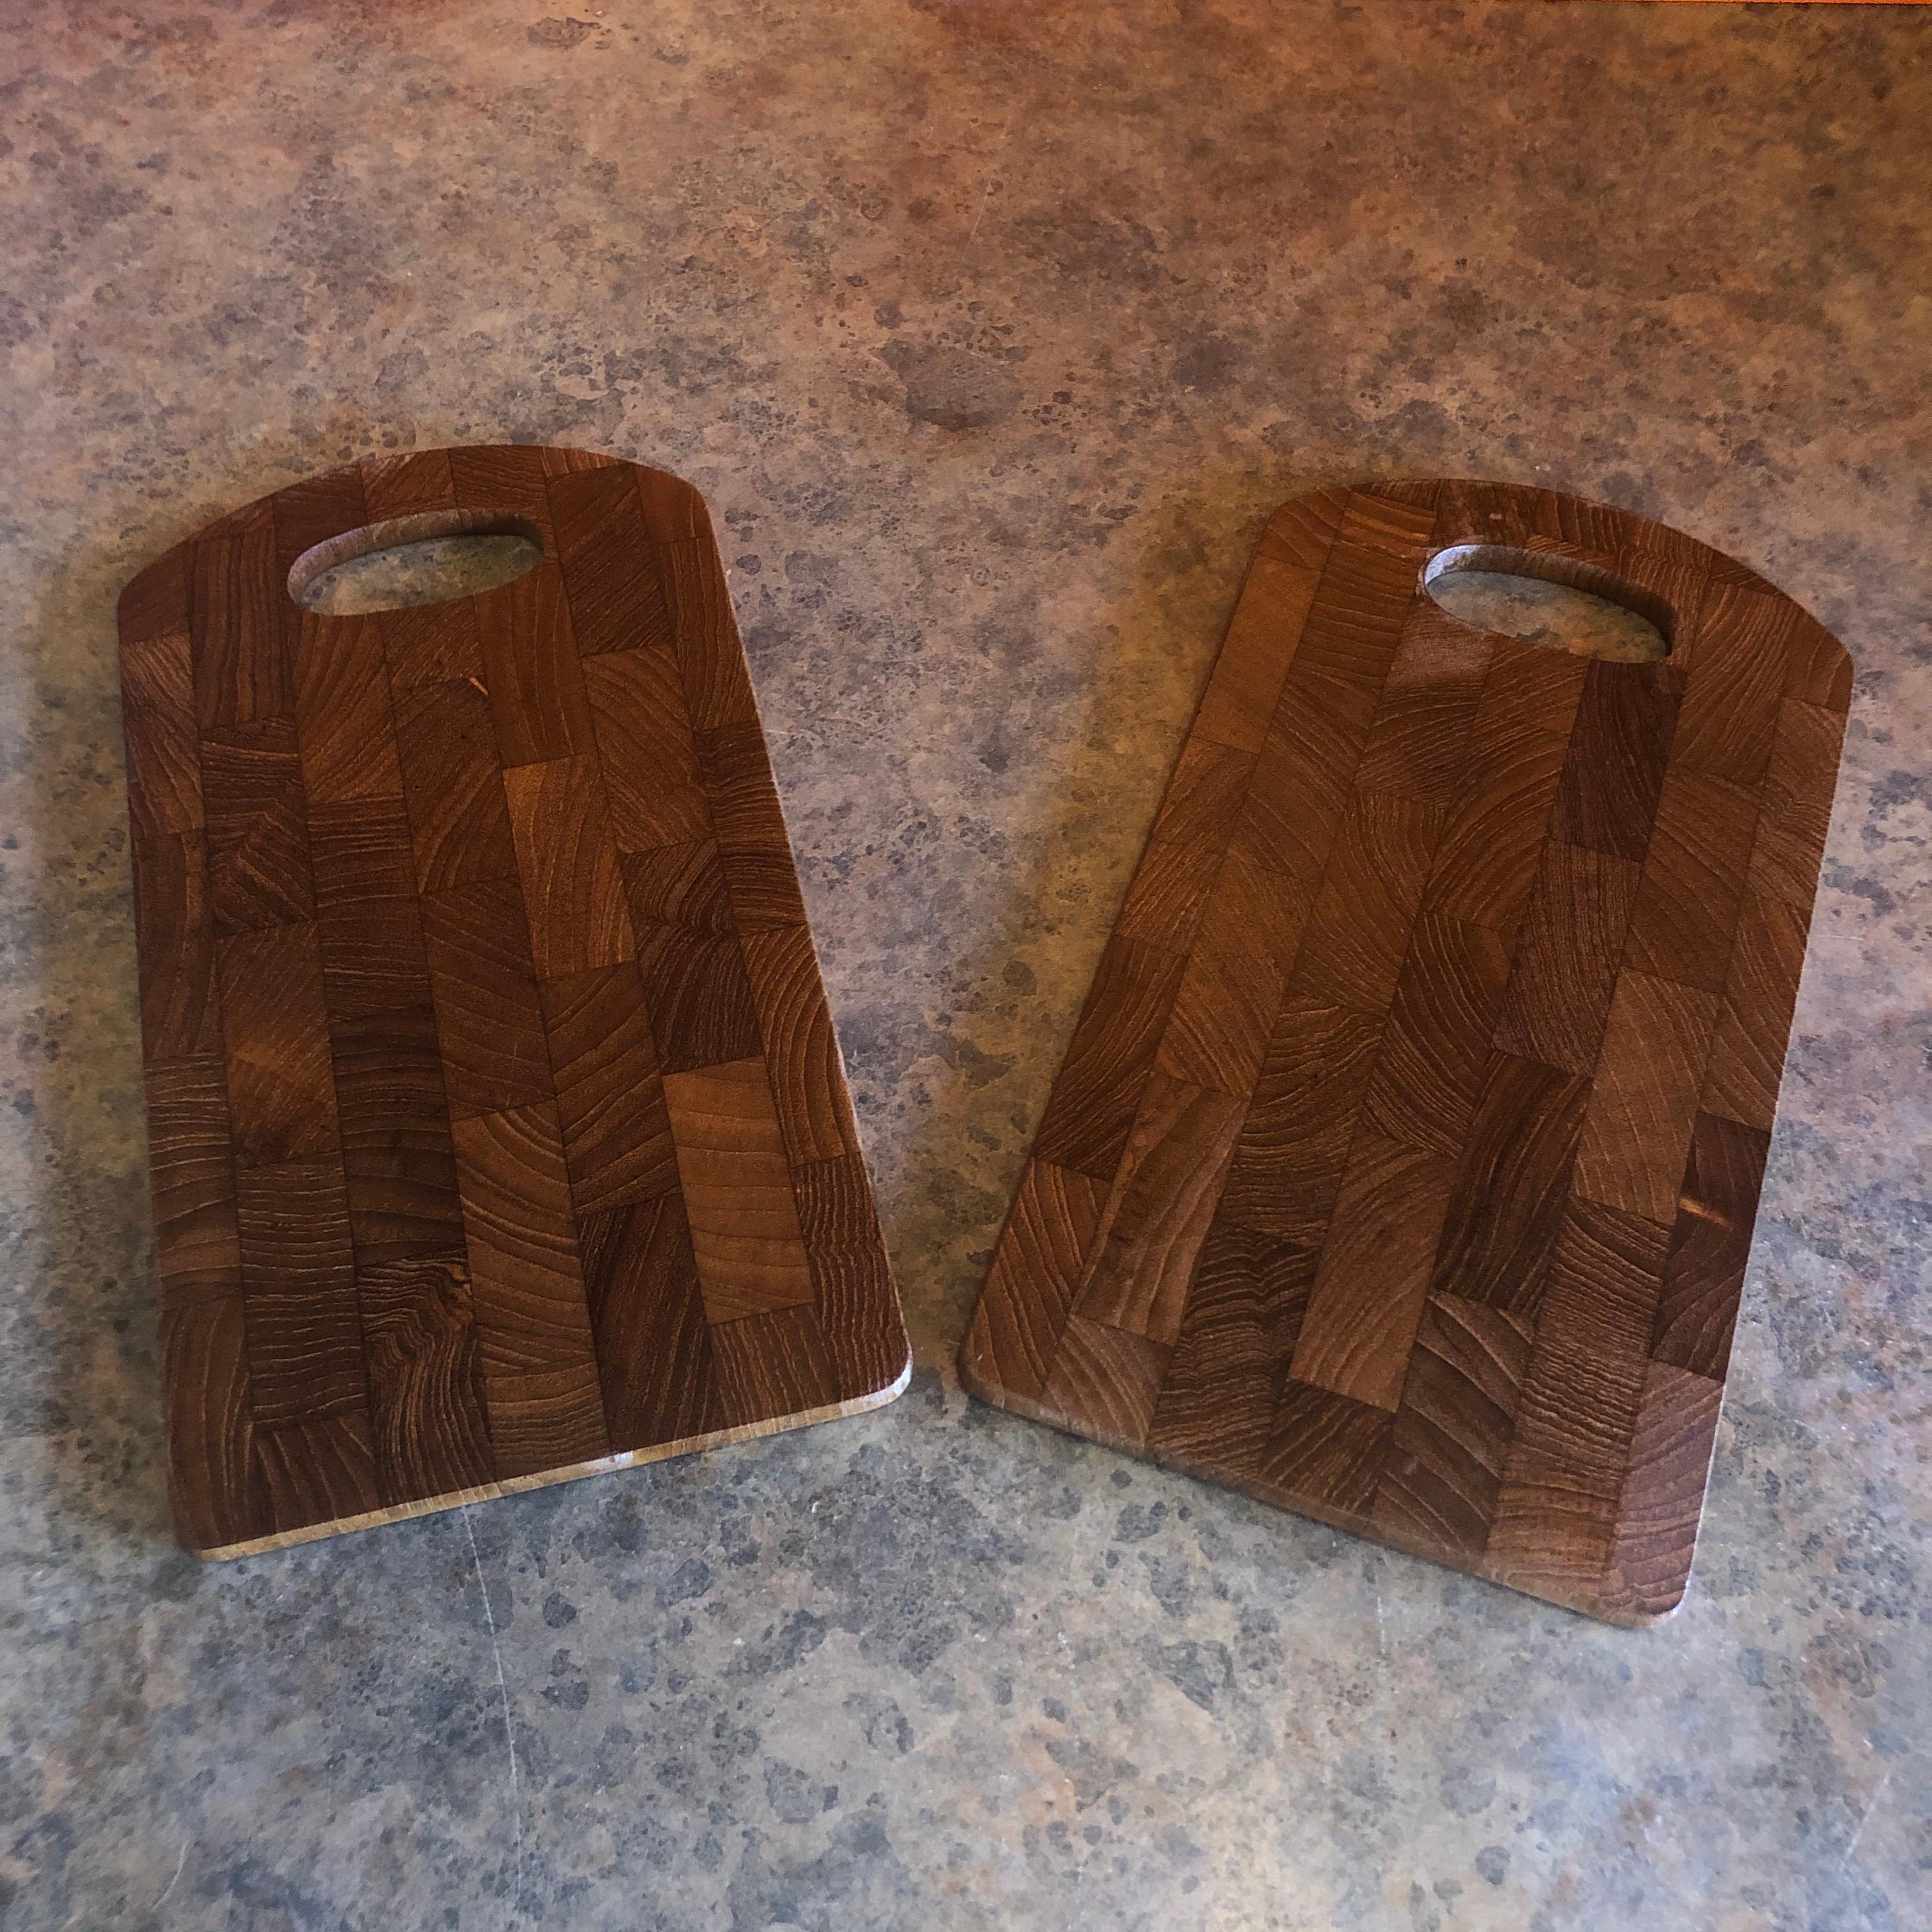 Pair of petite Danish modern teak cutting boards or trays by Jens Quistgaard for Dansk, circa 1960s. The boards are solid teak and measure 6